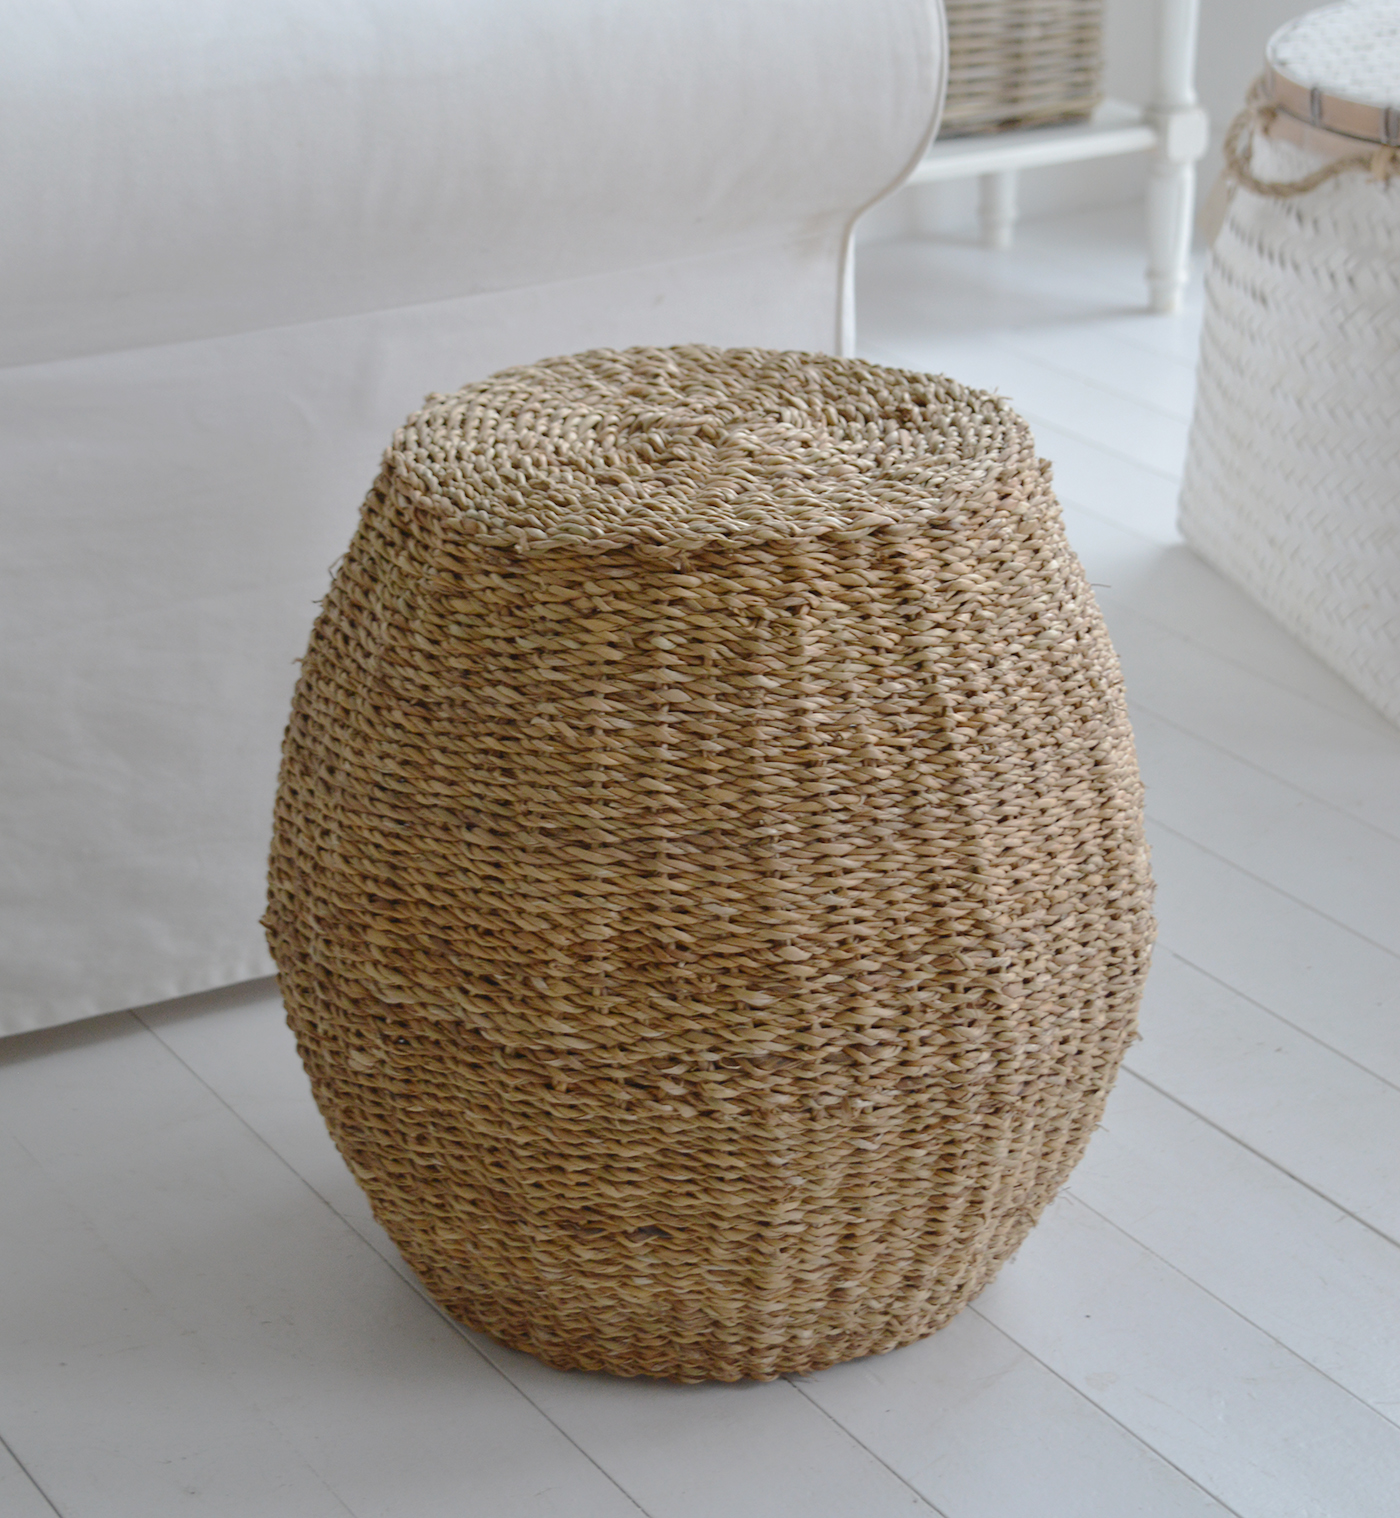 Cove Bay Stool - New England Furniture for coastal, beach house and modern country furniture